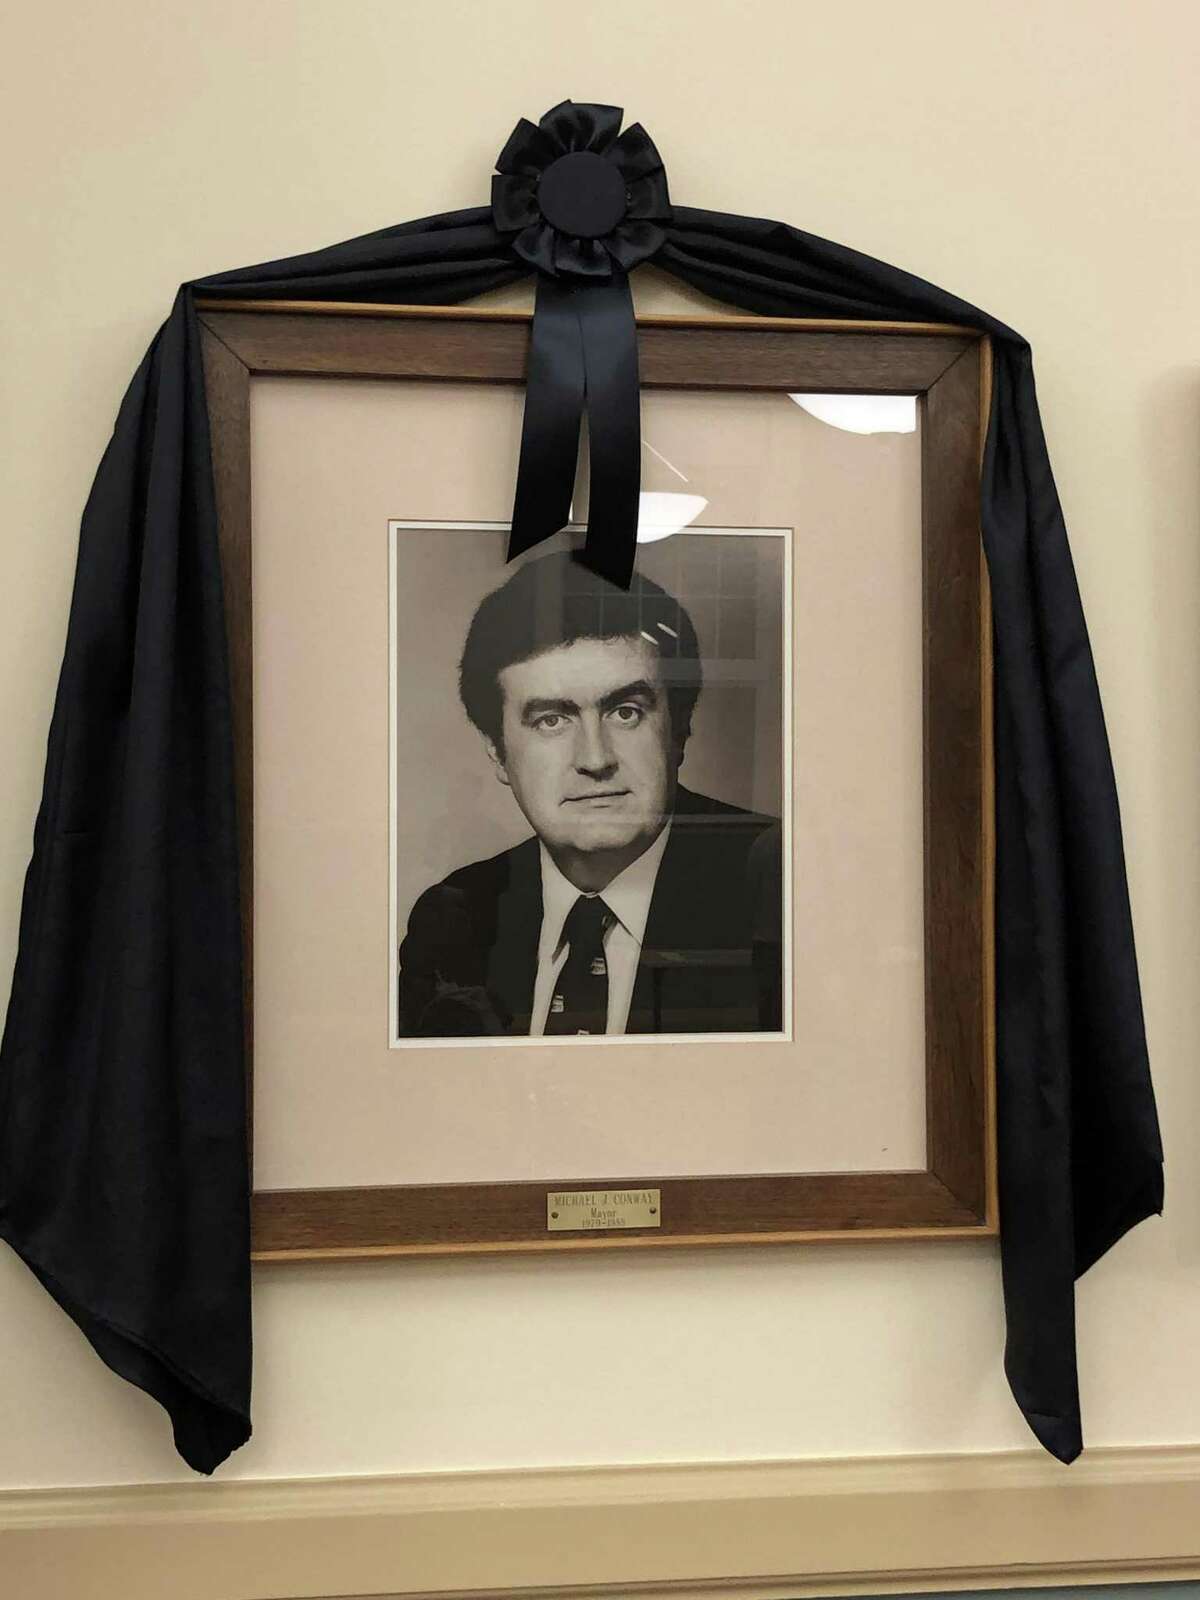 A portrait of former Mayor Michael J. Conway Jr., draped with memorial bunting, is displayed in the City Hall Auditorium.